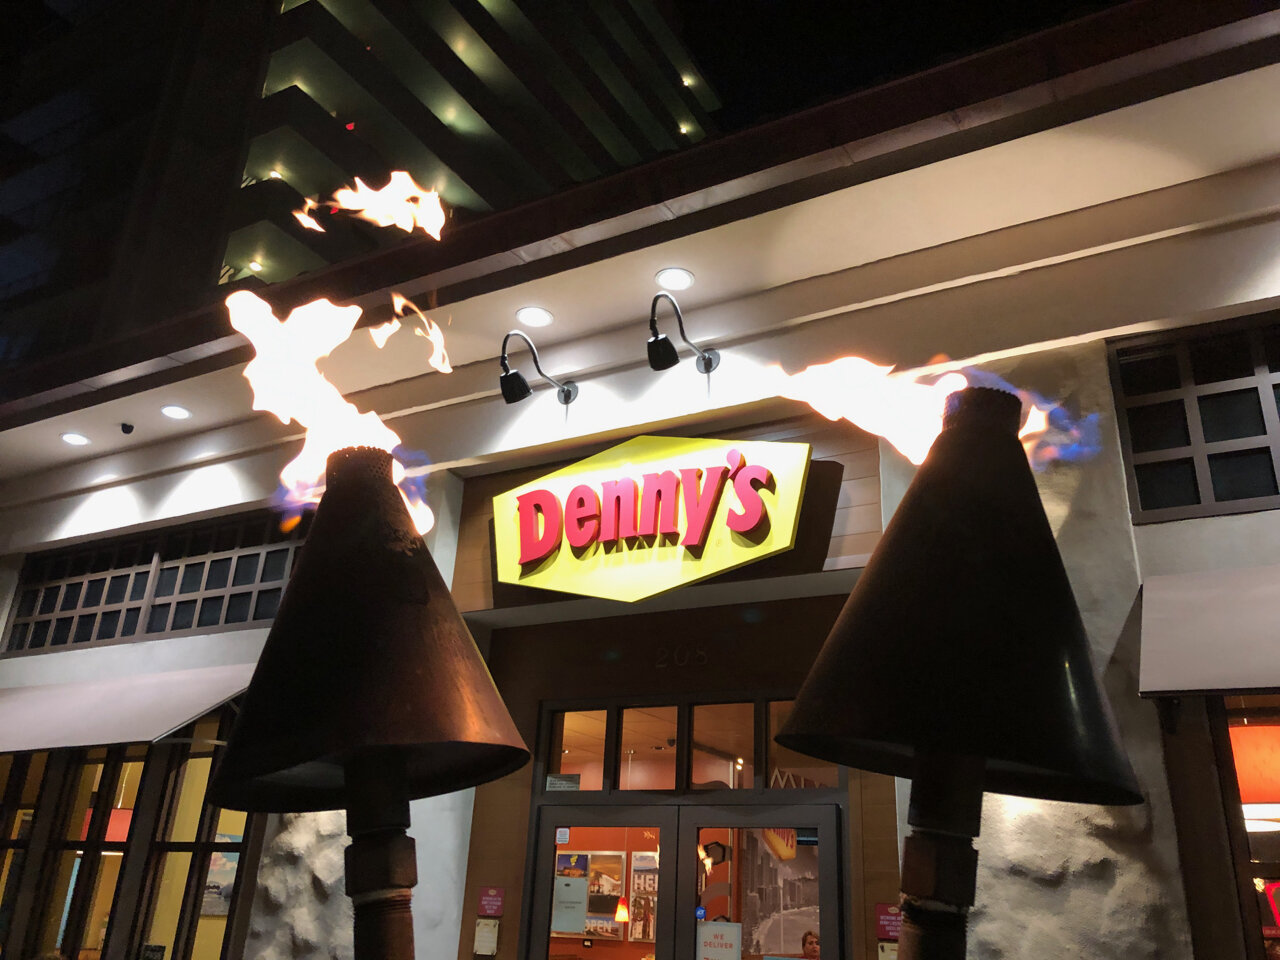 The Denny's in Waikiki has tiki torches out front